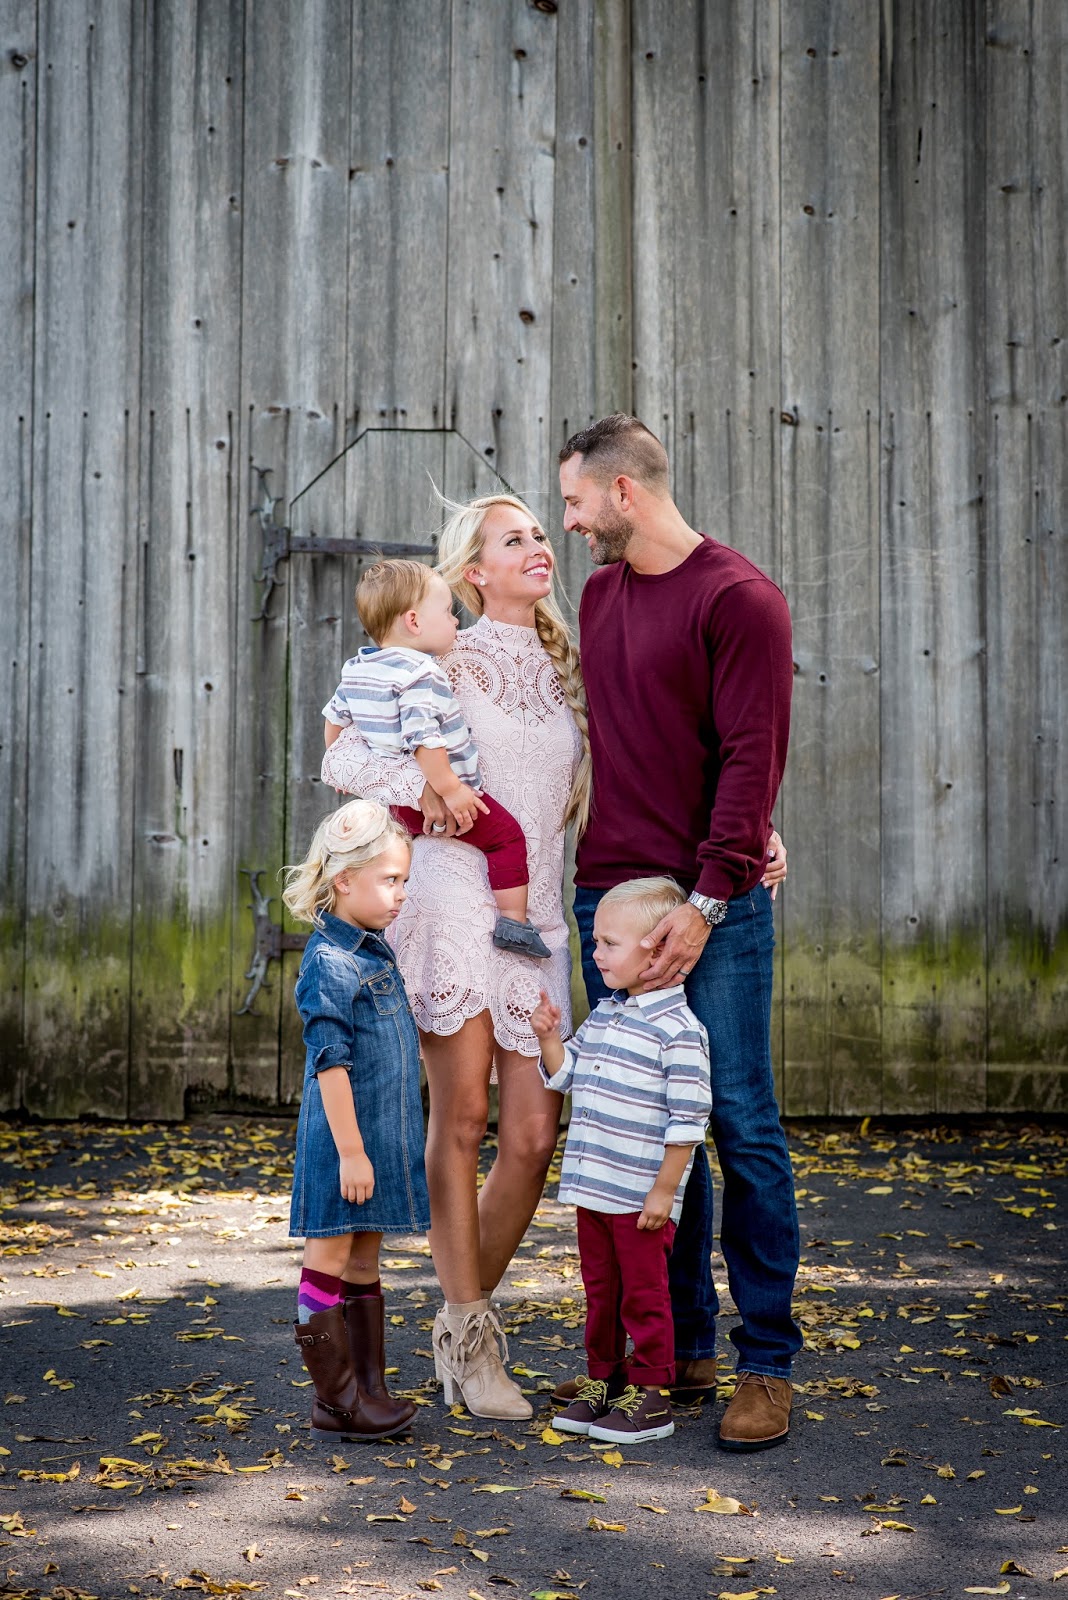 Fall Outfit Ideas For Family Photos: Look Fabulous Together